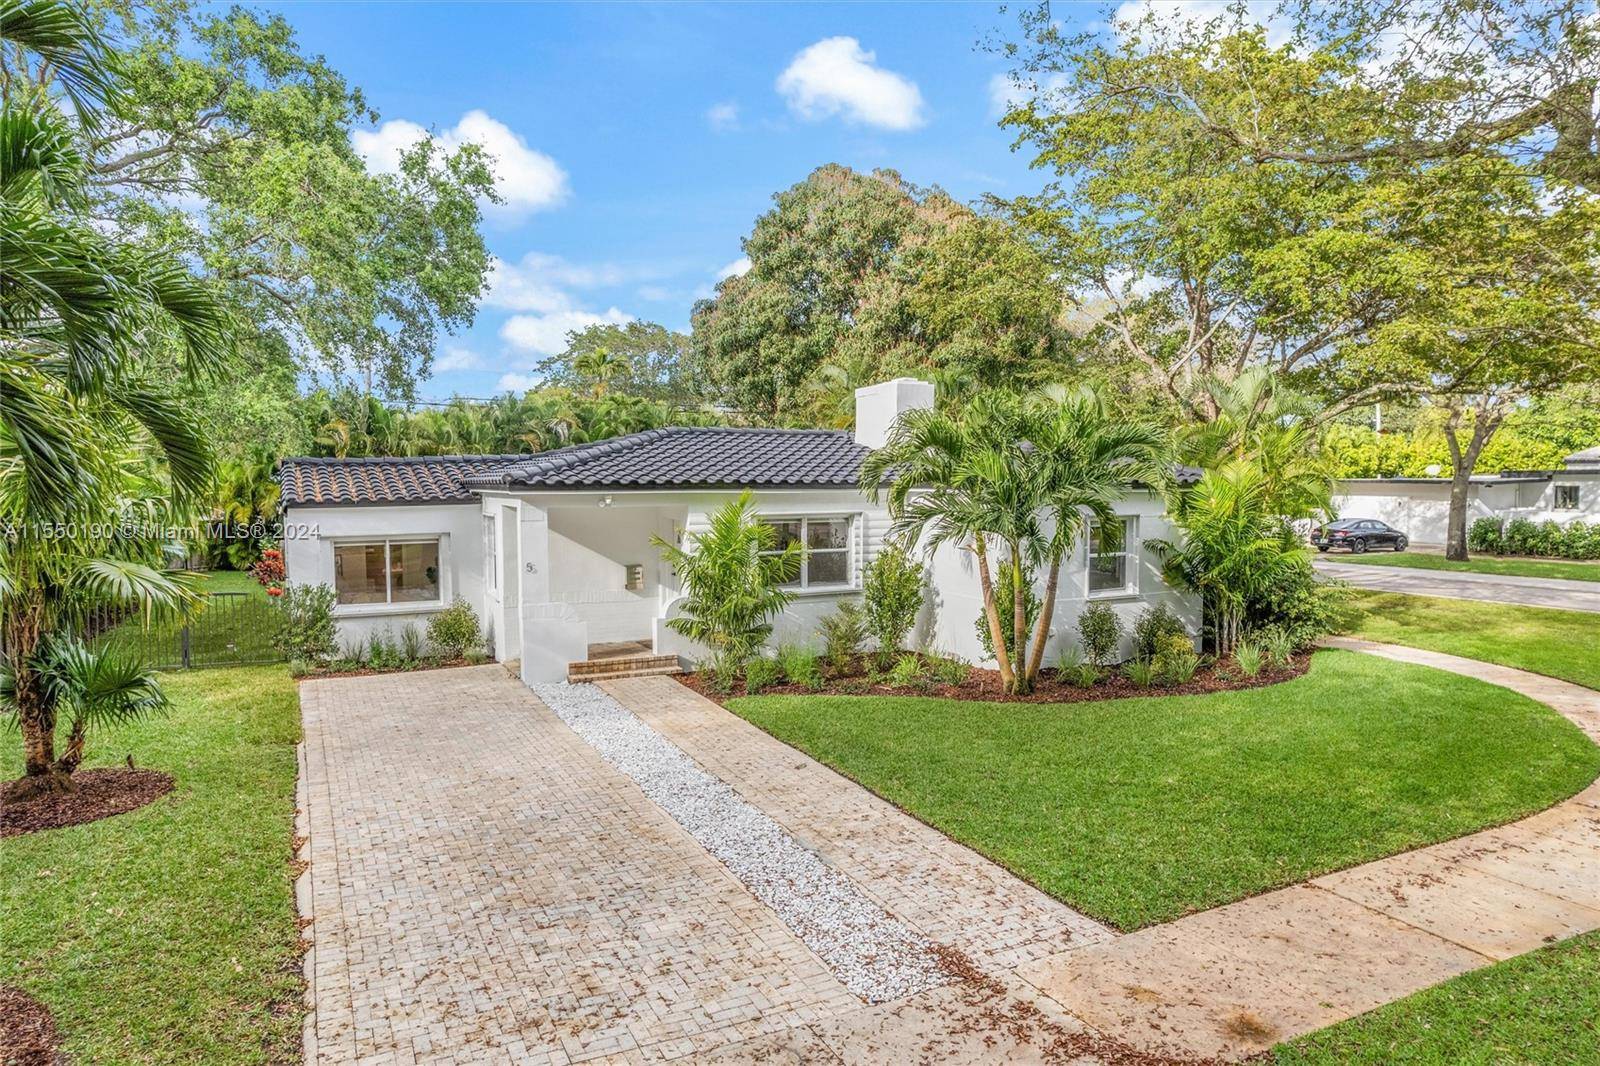 Beautiful, updated home in Miami Shores on a corner lot.